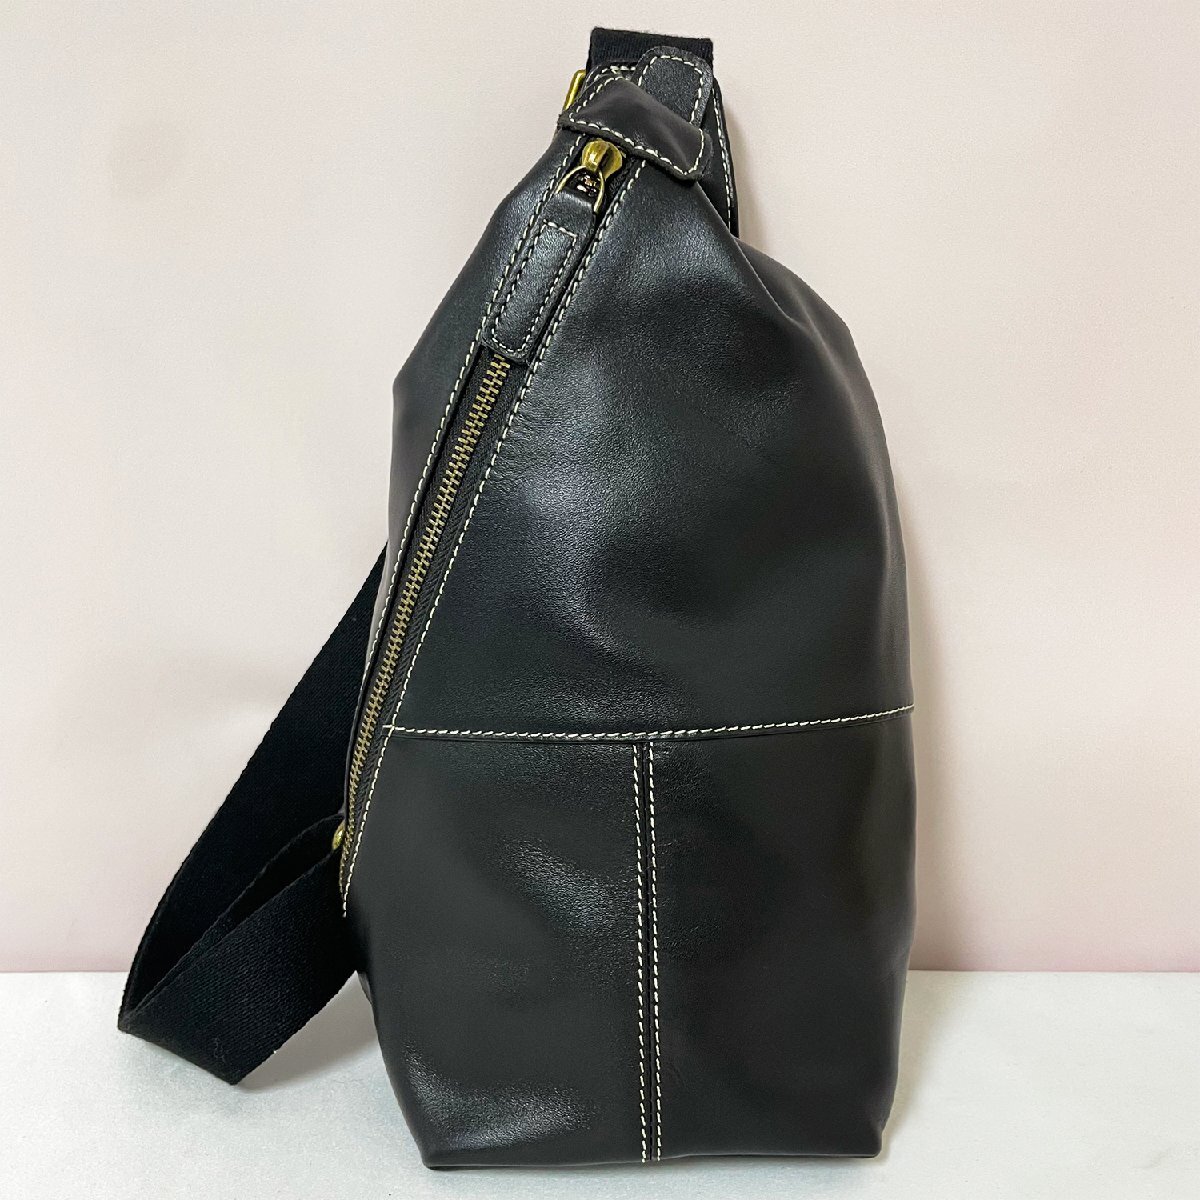  piece .* body bag regular price 12 ten thousand *Emmauela* Italy * milano departure * high class cow leather original leather water-repellent compact diagonal ..2WAY commuting going to school business men's 